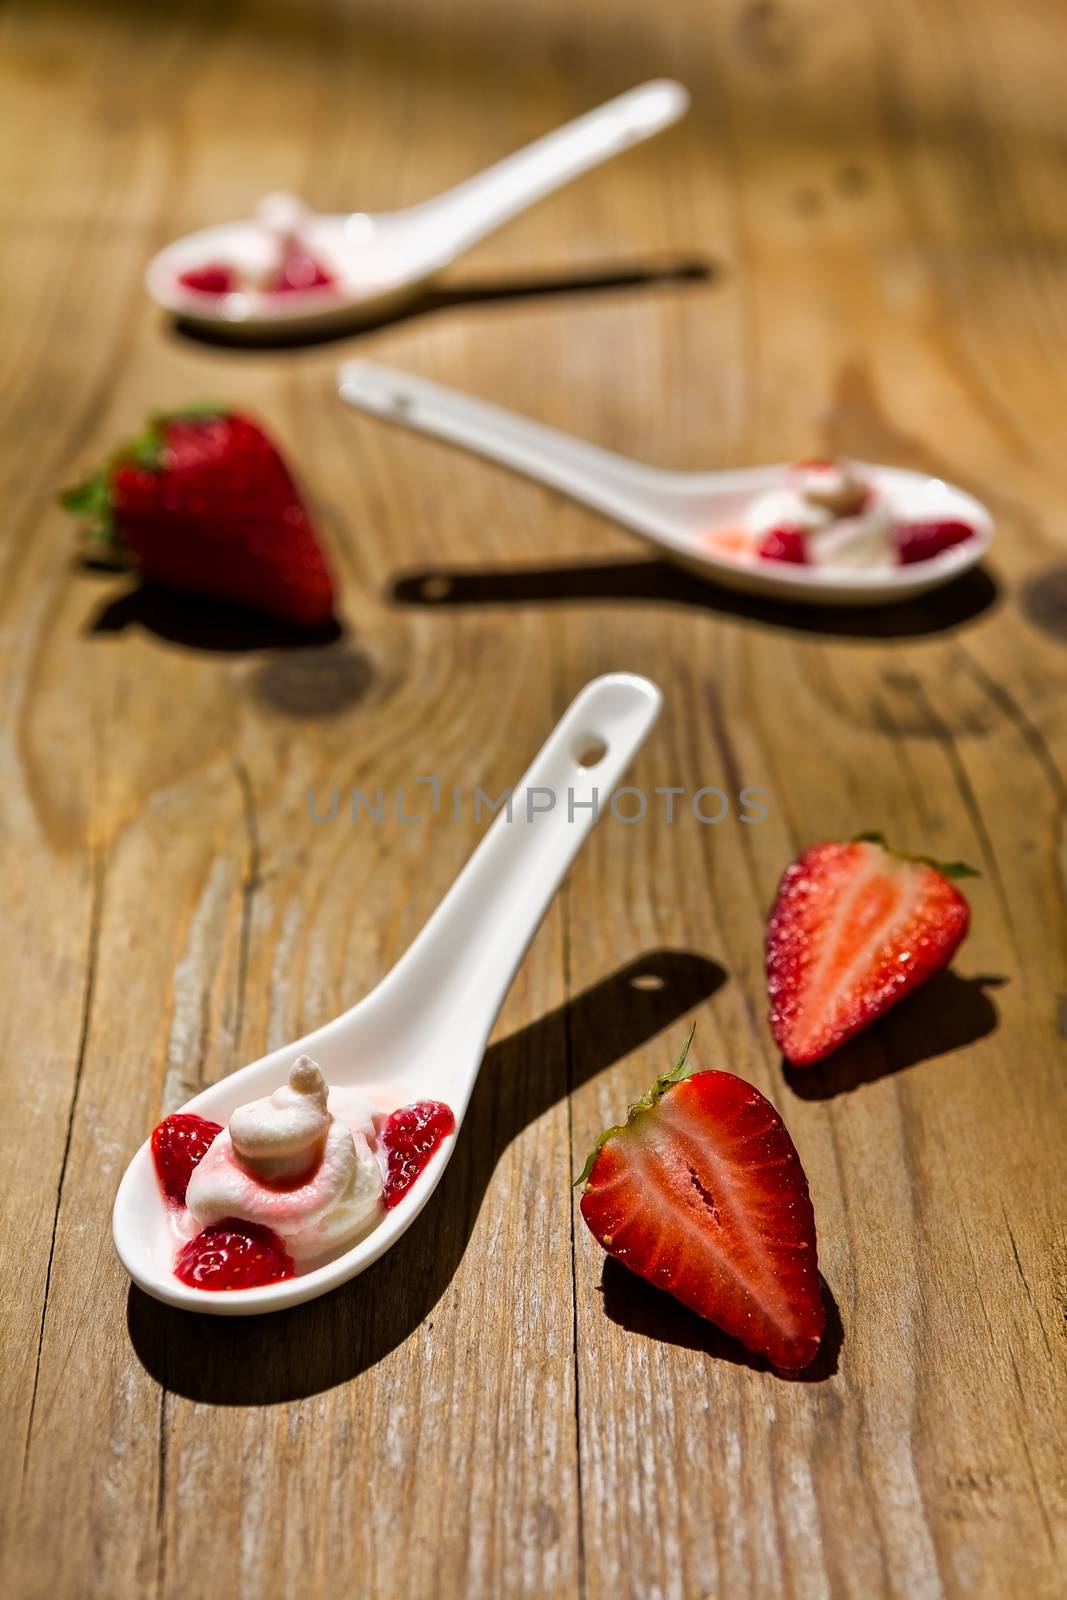 Mascarpone cheese and strawberries on wooden background